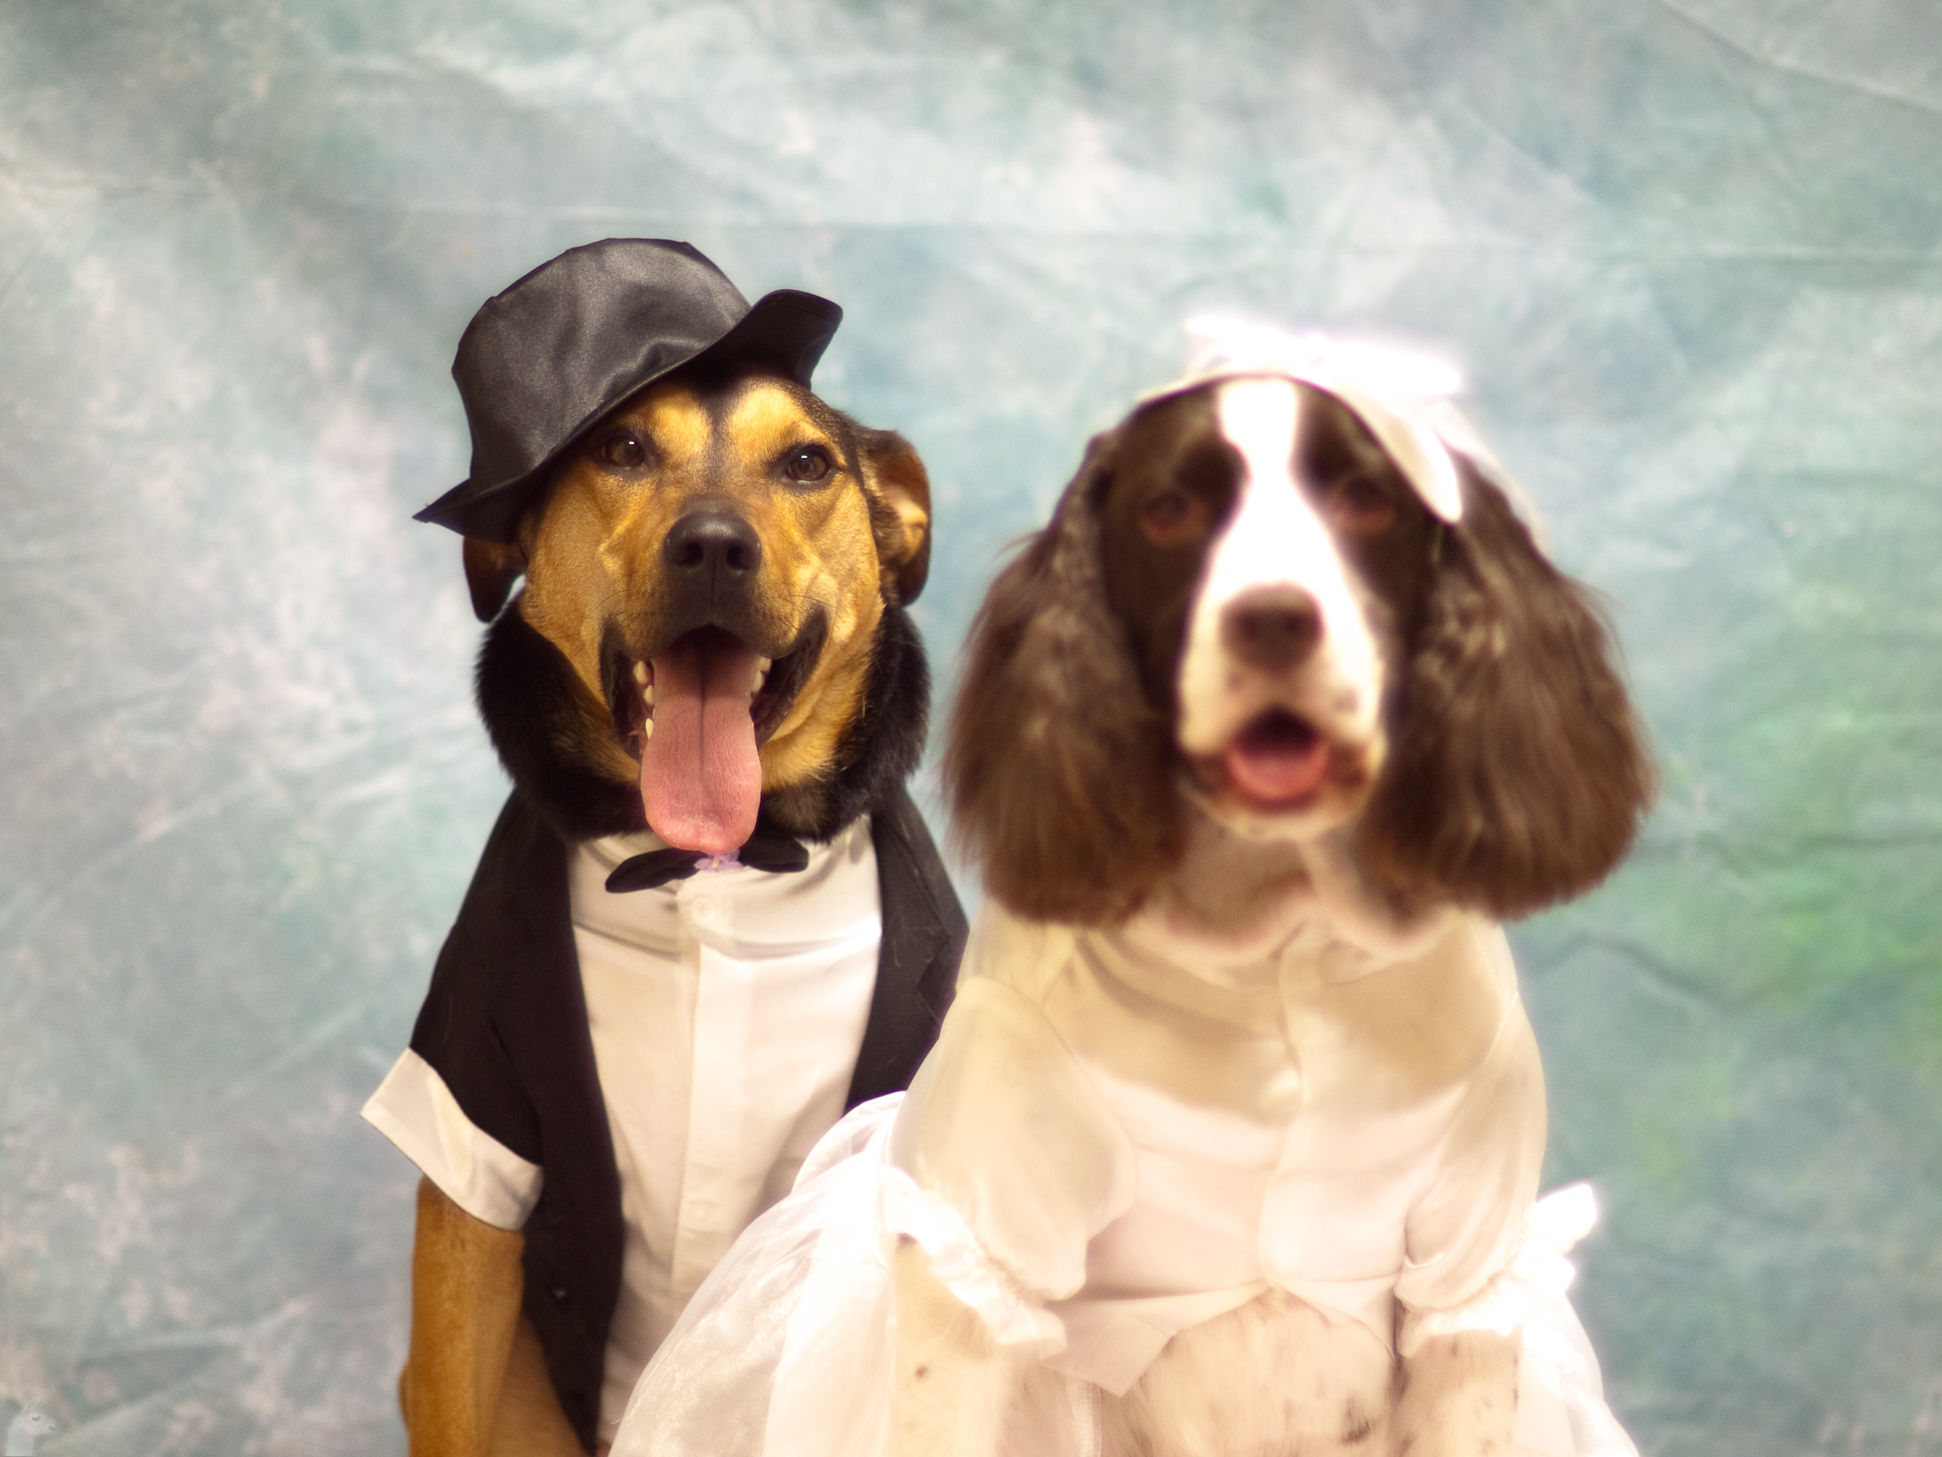 a dog in a wedding dress and a dog in a tuxedo